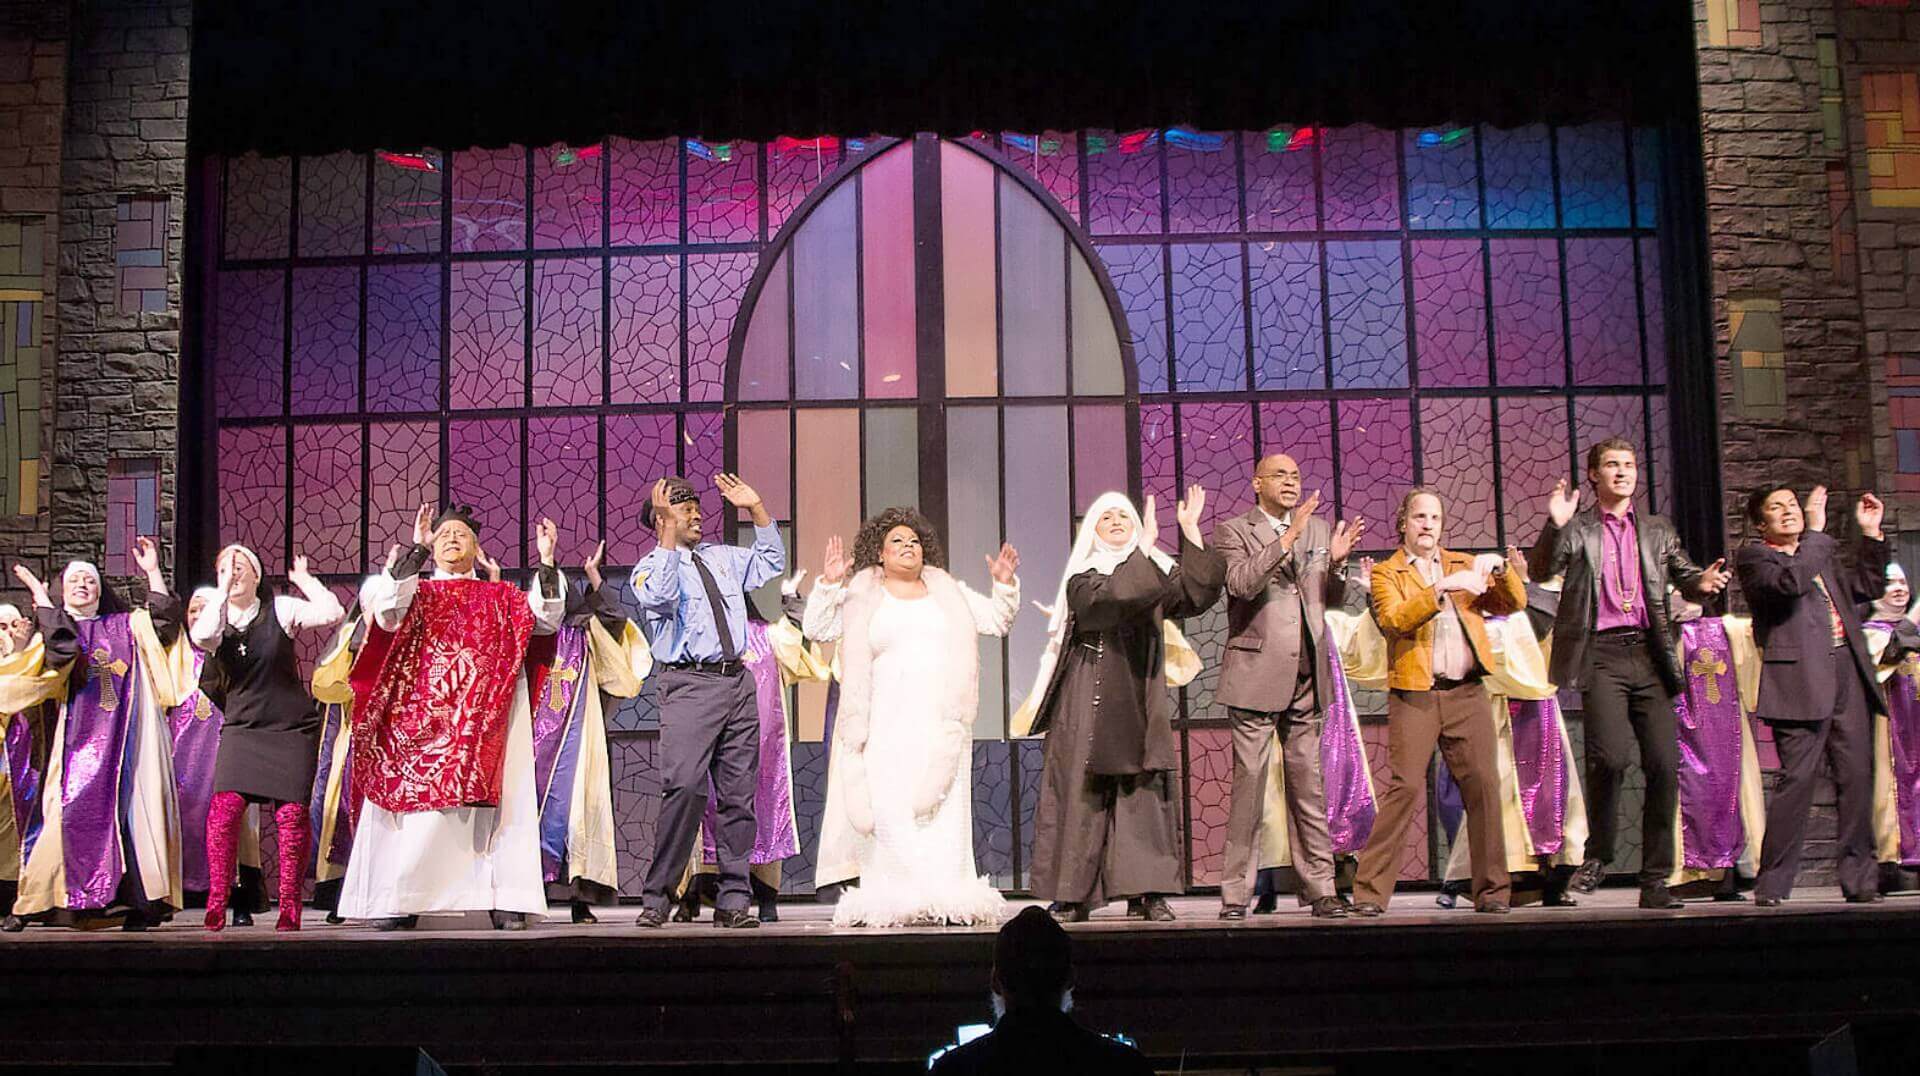 Alter Boys - Sister Act Costume Rental pictures - Stagecraft Theatrical